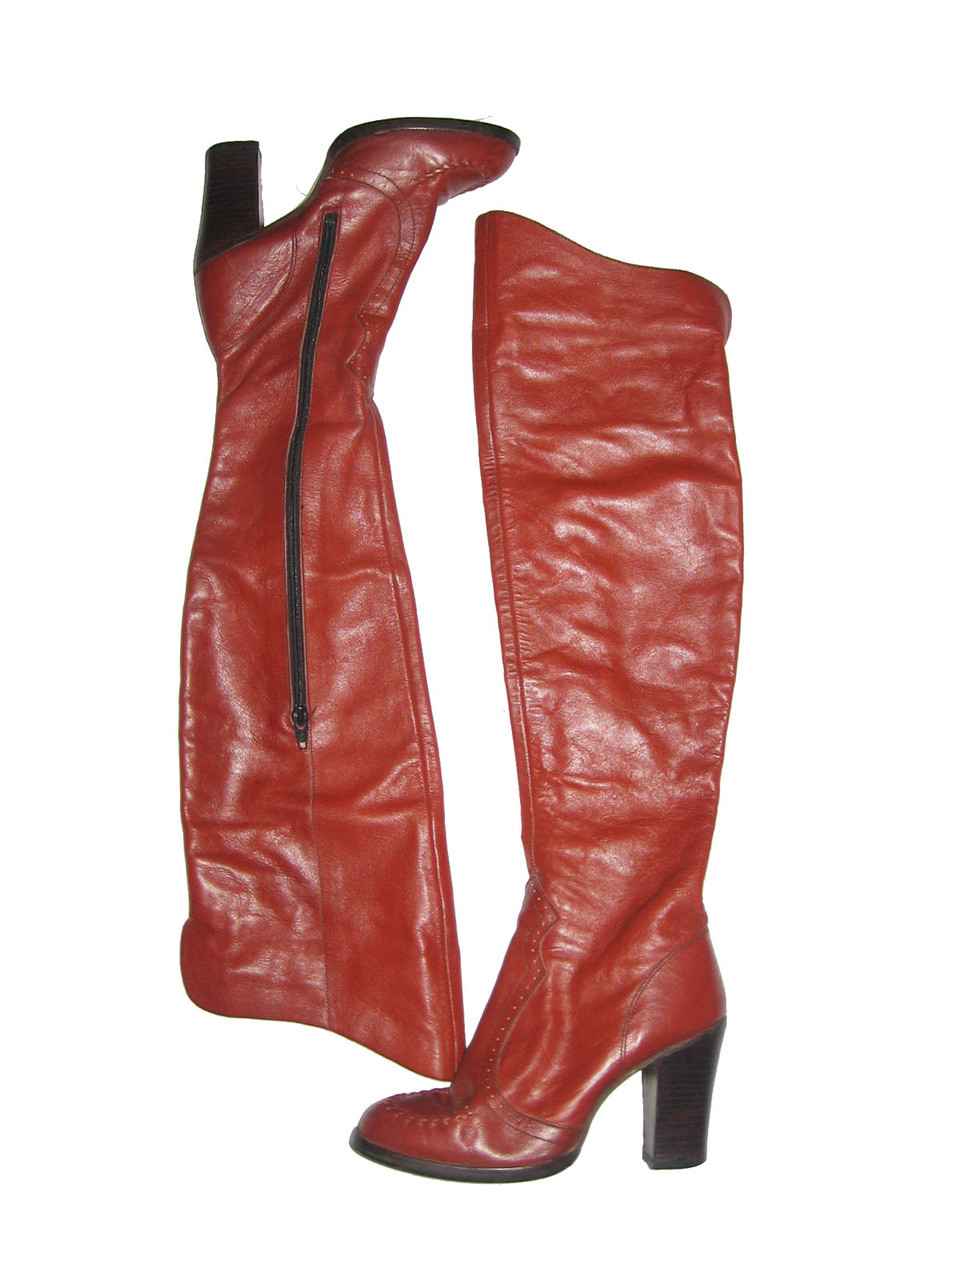 vintage high boots